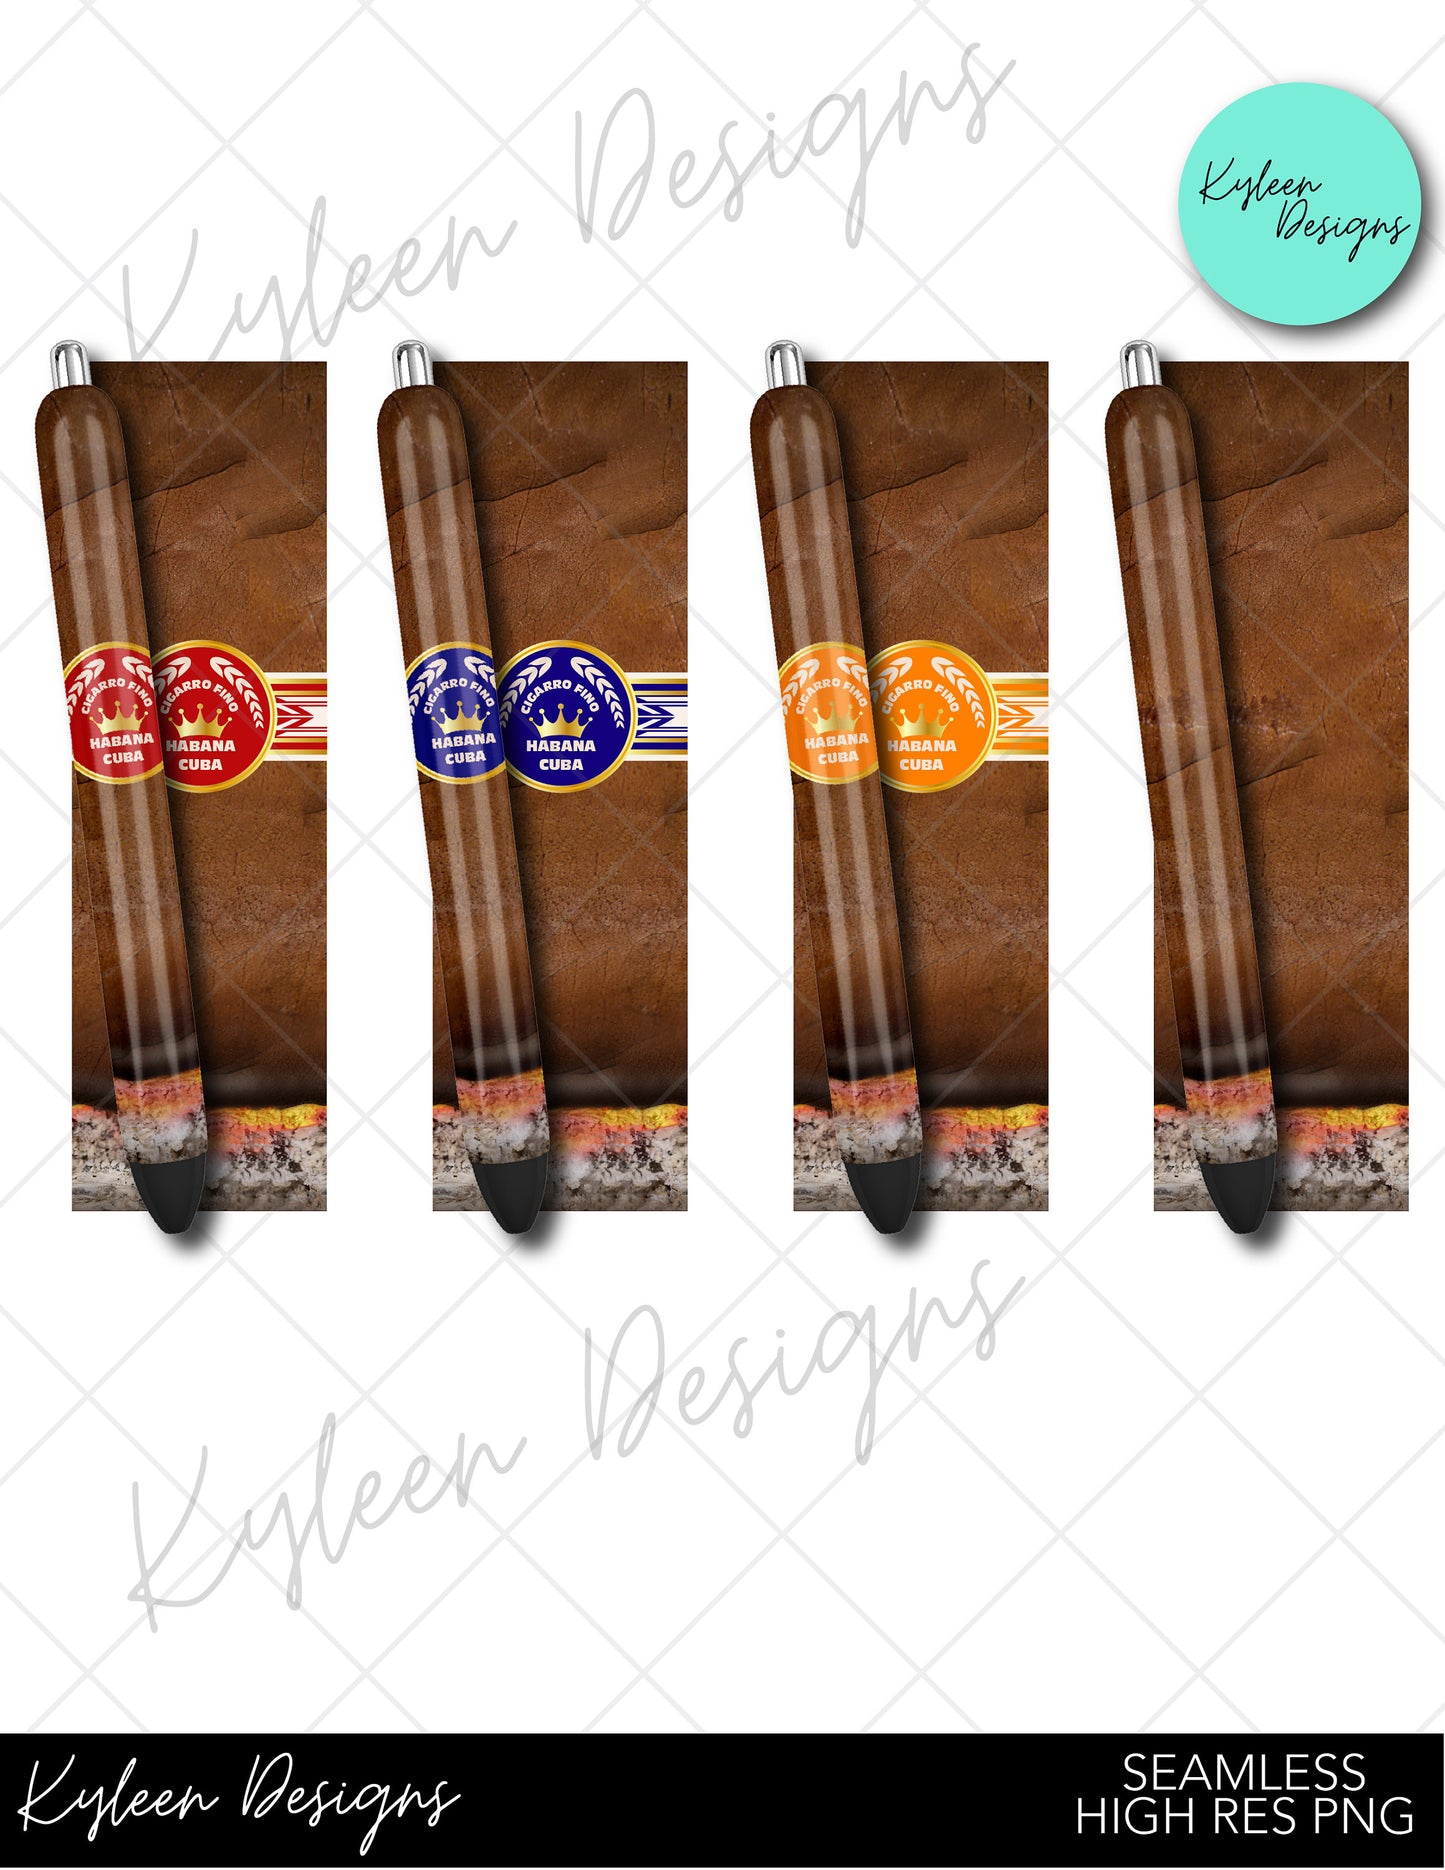 SEAMLESS cigar pen wraps for waterslide high RES PNG